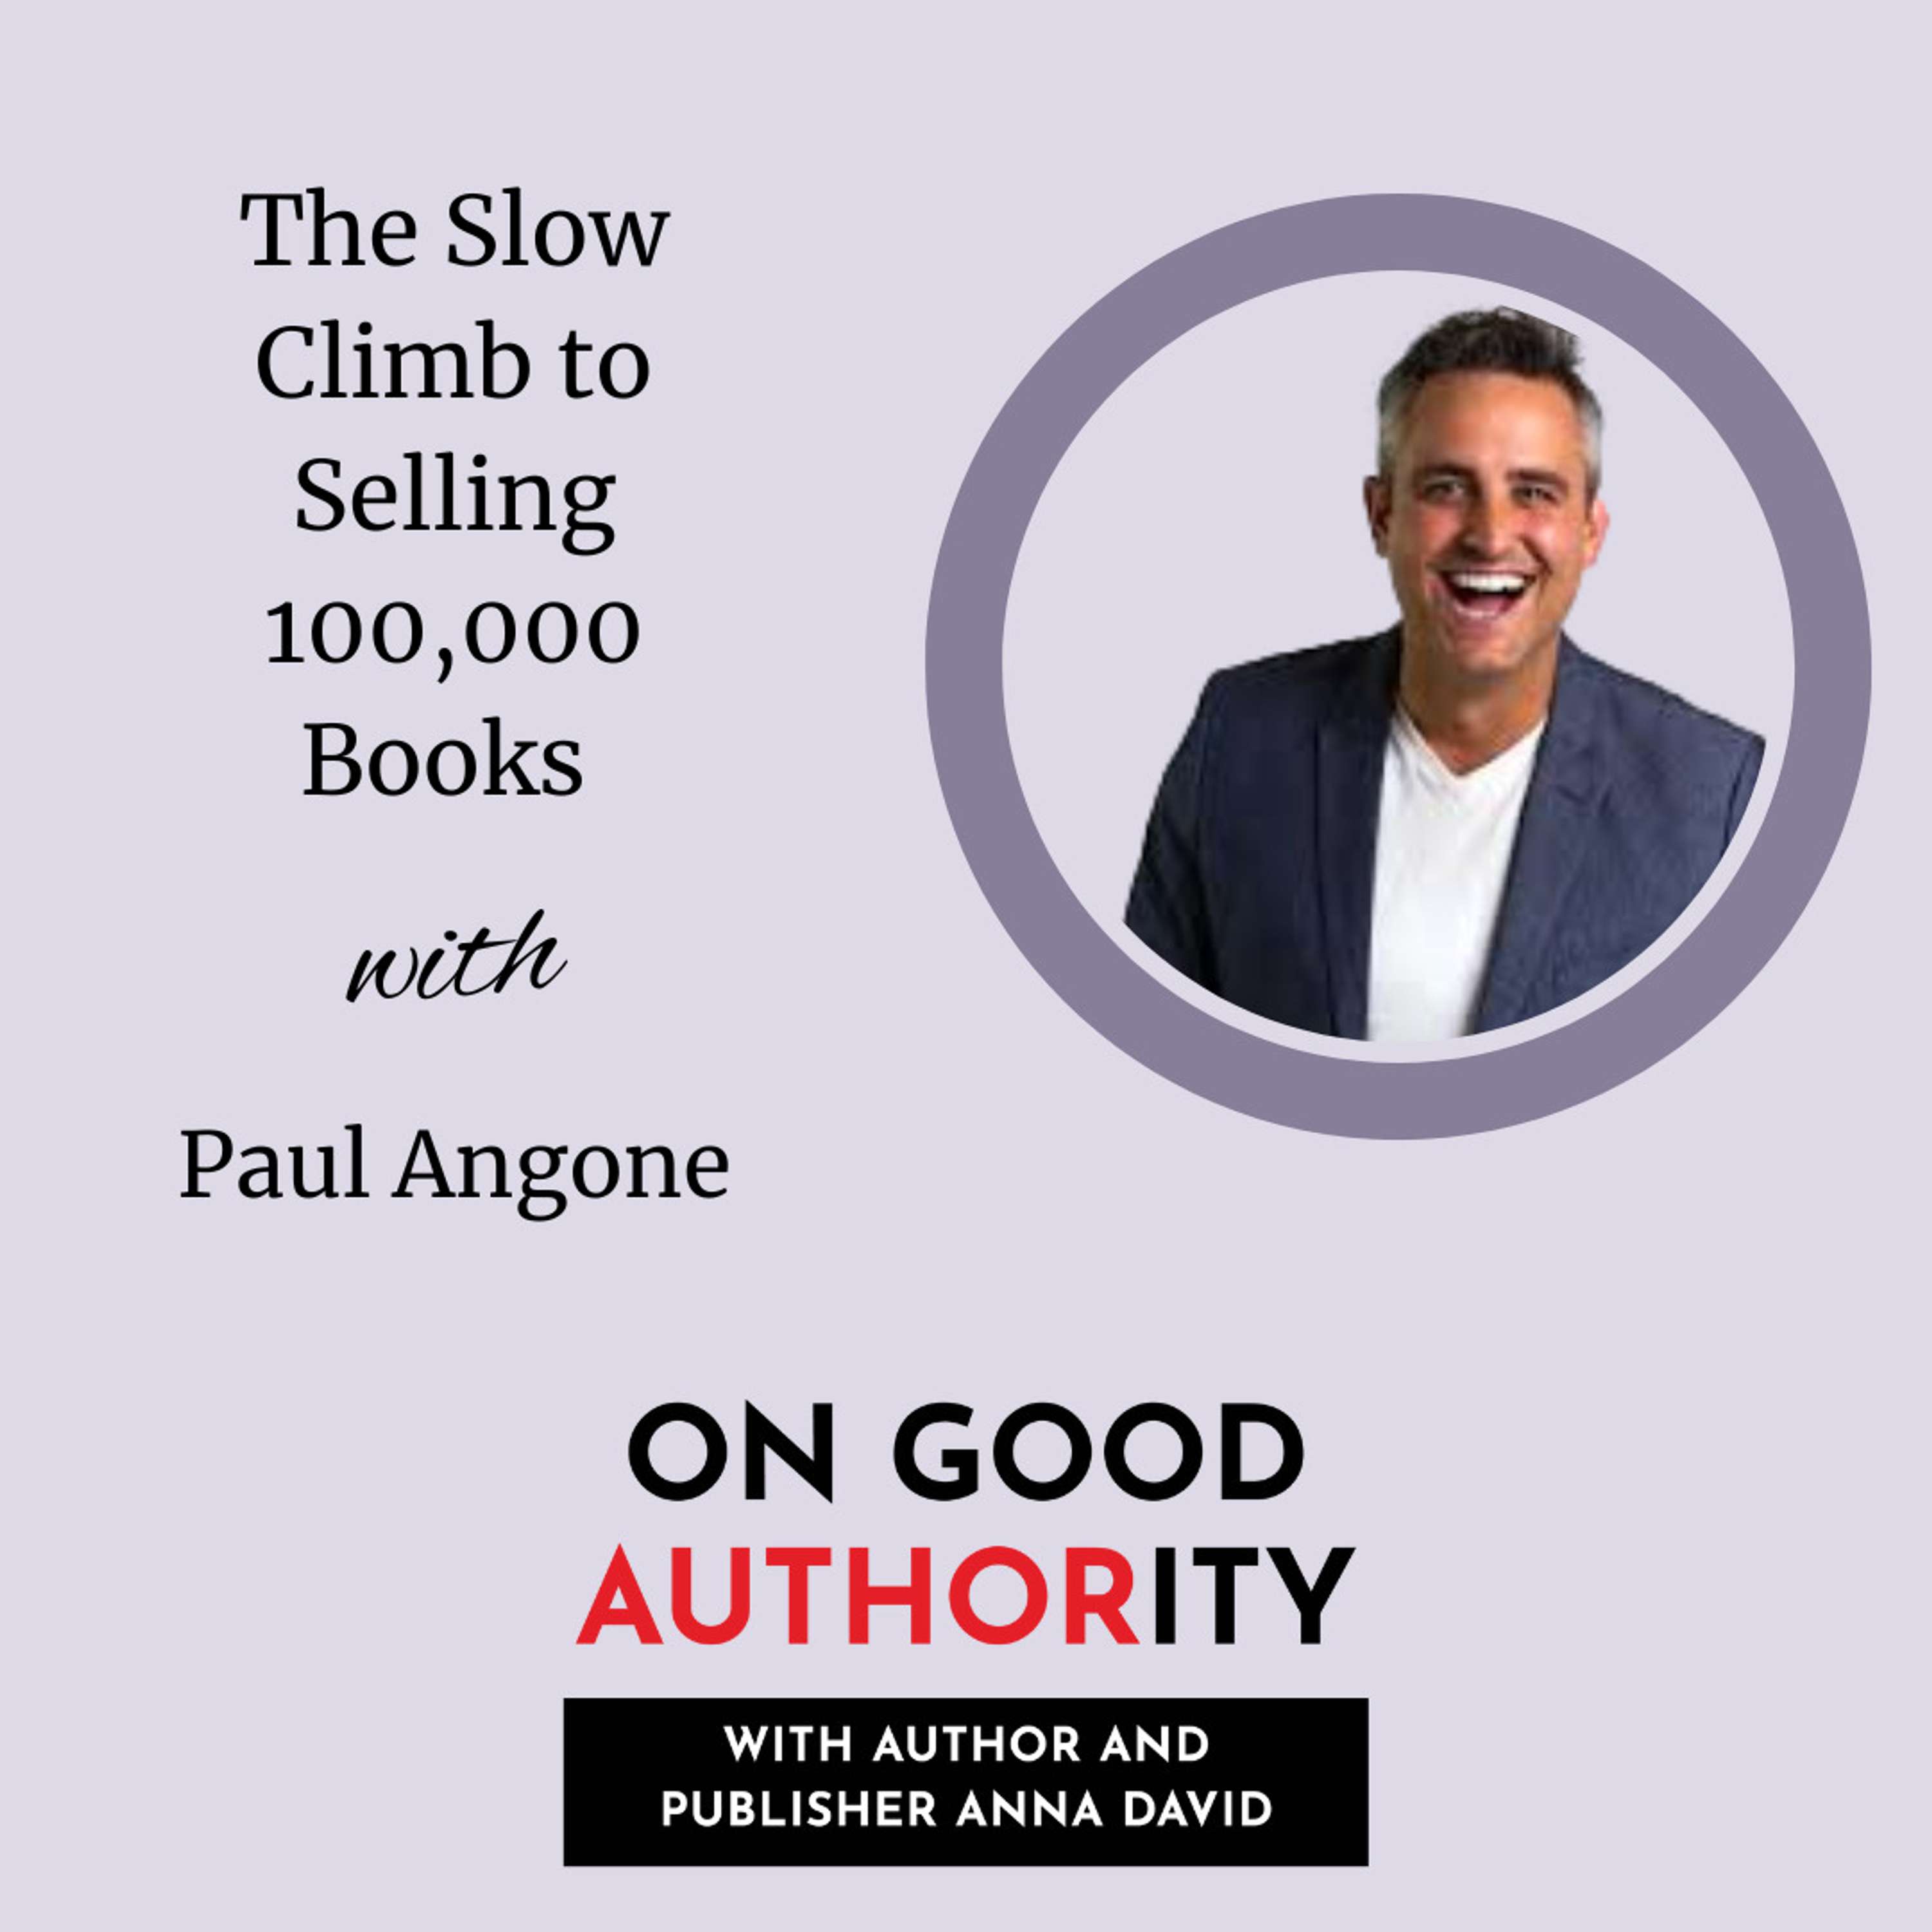 The Slow Climb to Selling 100,000 Books with Paul Angone